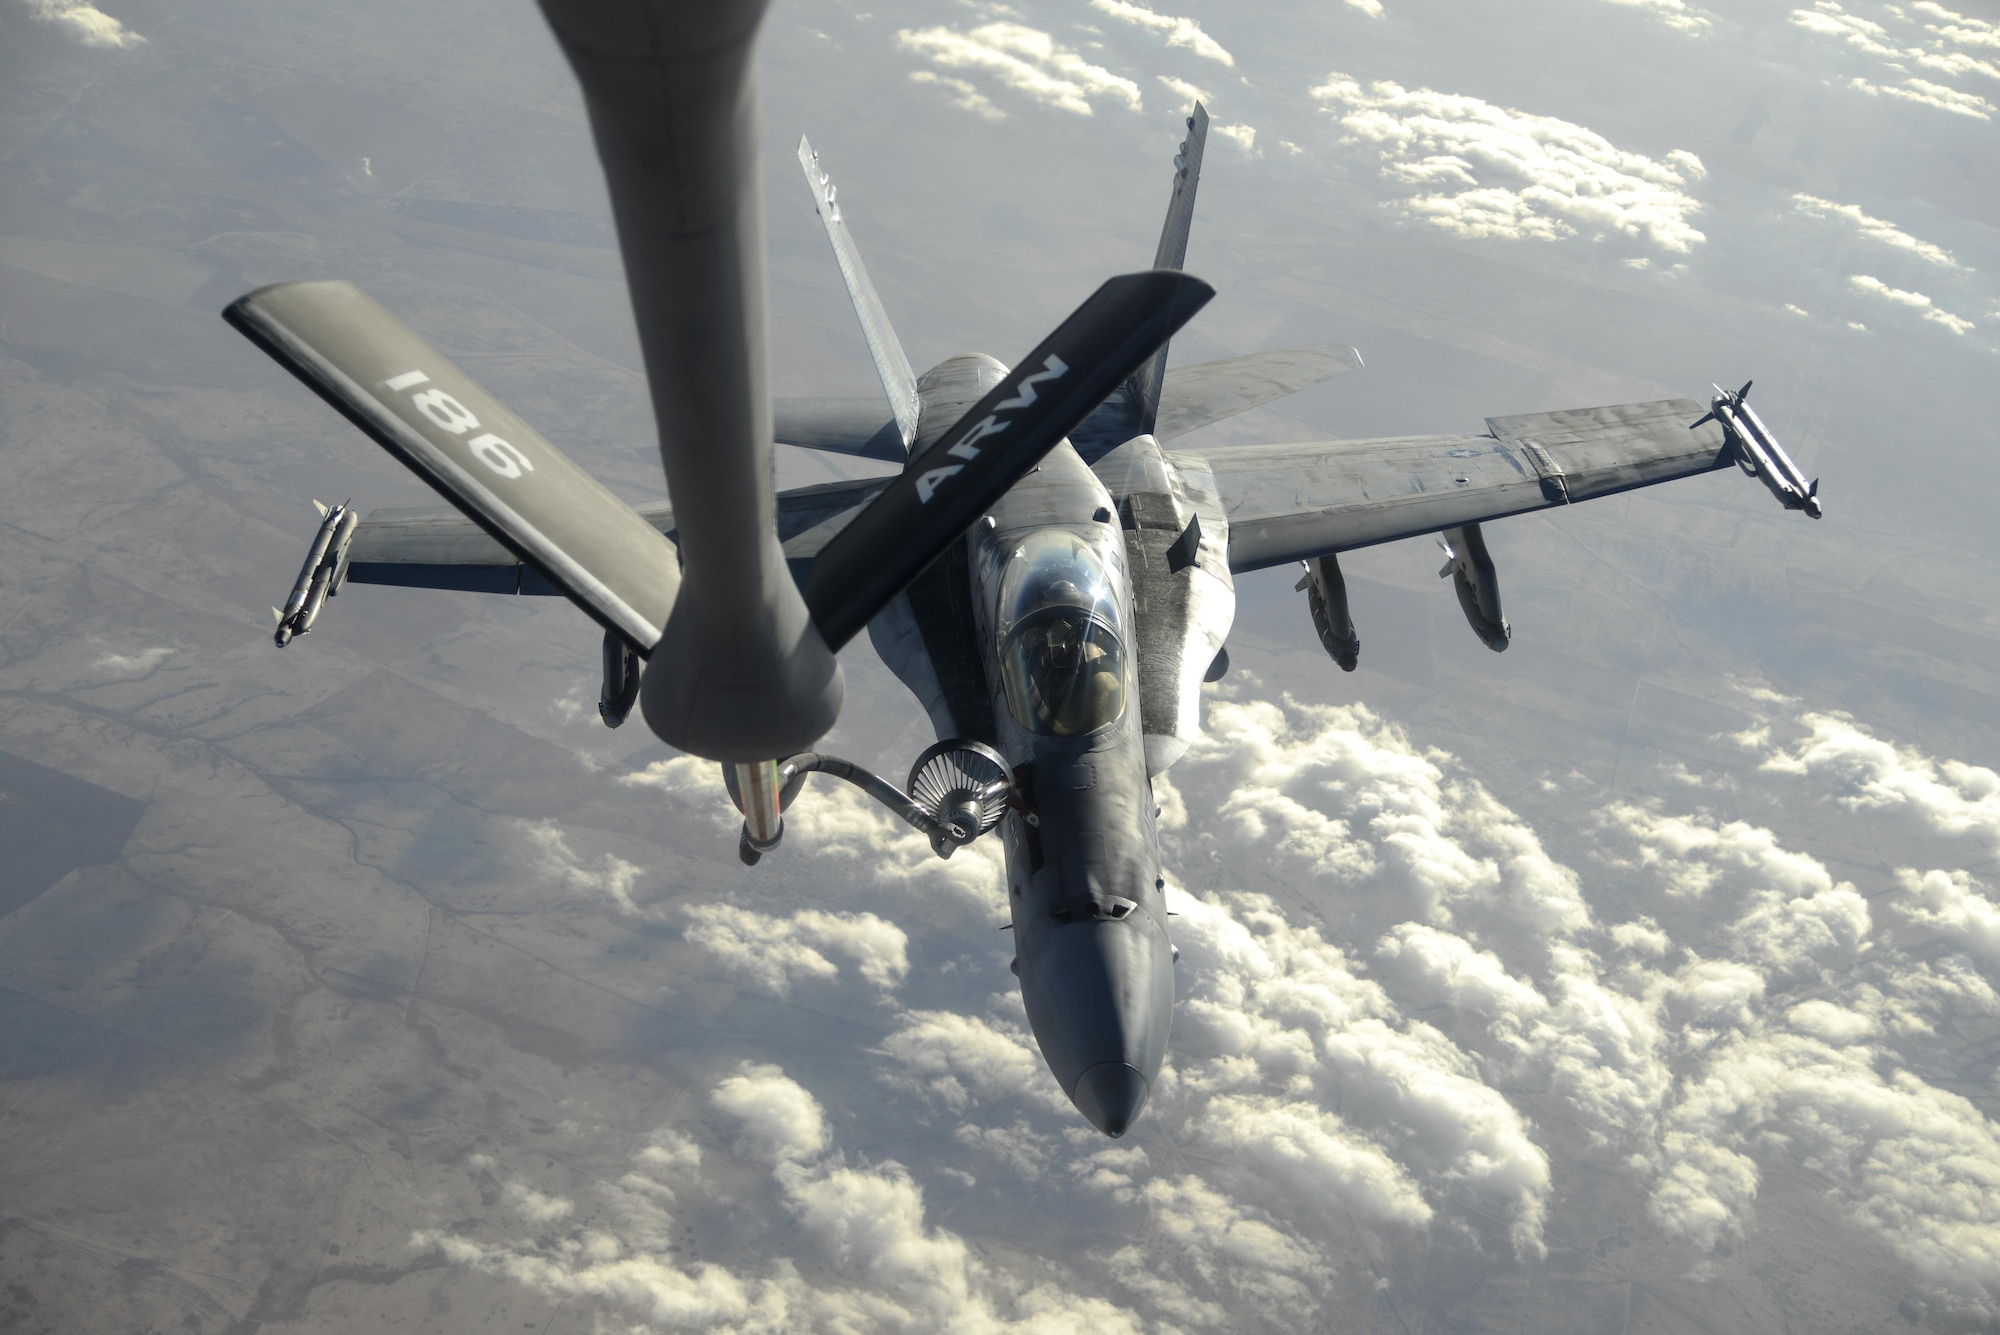 A U.S. Navy F/A-18C from the Strike Fighter Squadron VFA-37 Ragin' Bulls receives fuel in flight from a U.S. Air Force KC-135 Stratotanker over Southwest Asia May 21, 2017. Assigned to the 340th Expeditionary Air Refueling Squadron, out of Al Udeid Air Base, Qatar, the tanker from the 186th Air Refueling Wing, Mississippi Air National Guard was fitted with a drogue attached to the boom, for specialized receiver equipment on Navy and coalition aircraft. The 340th EARS maintains a 24/7 presence in the AOR, extending the missions of aircraft supporting Operation Inherent Resolve and the fight against ISIS. (U.S. Air National Guard photo by Master Sgt. Andrew J. Moseley/Released)